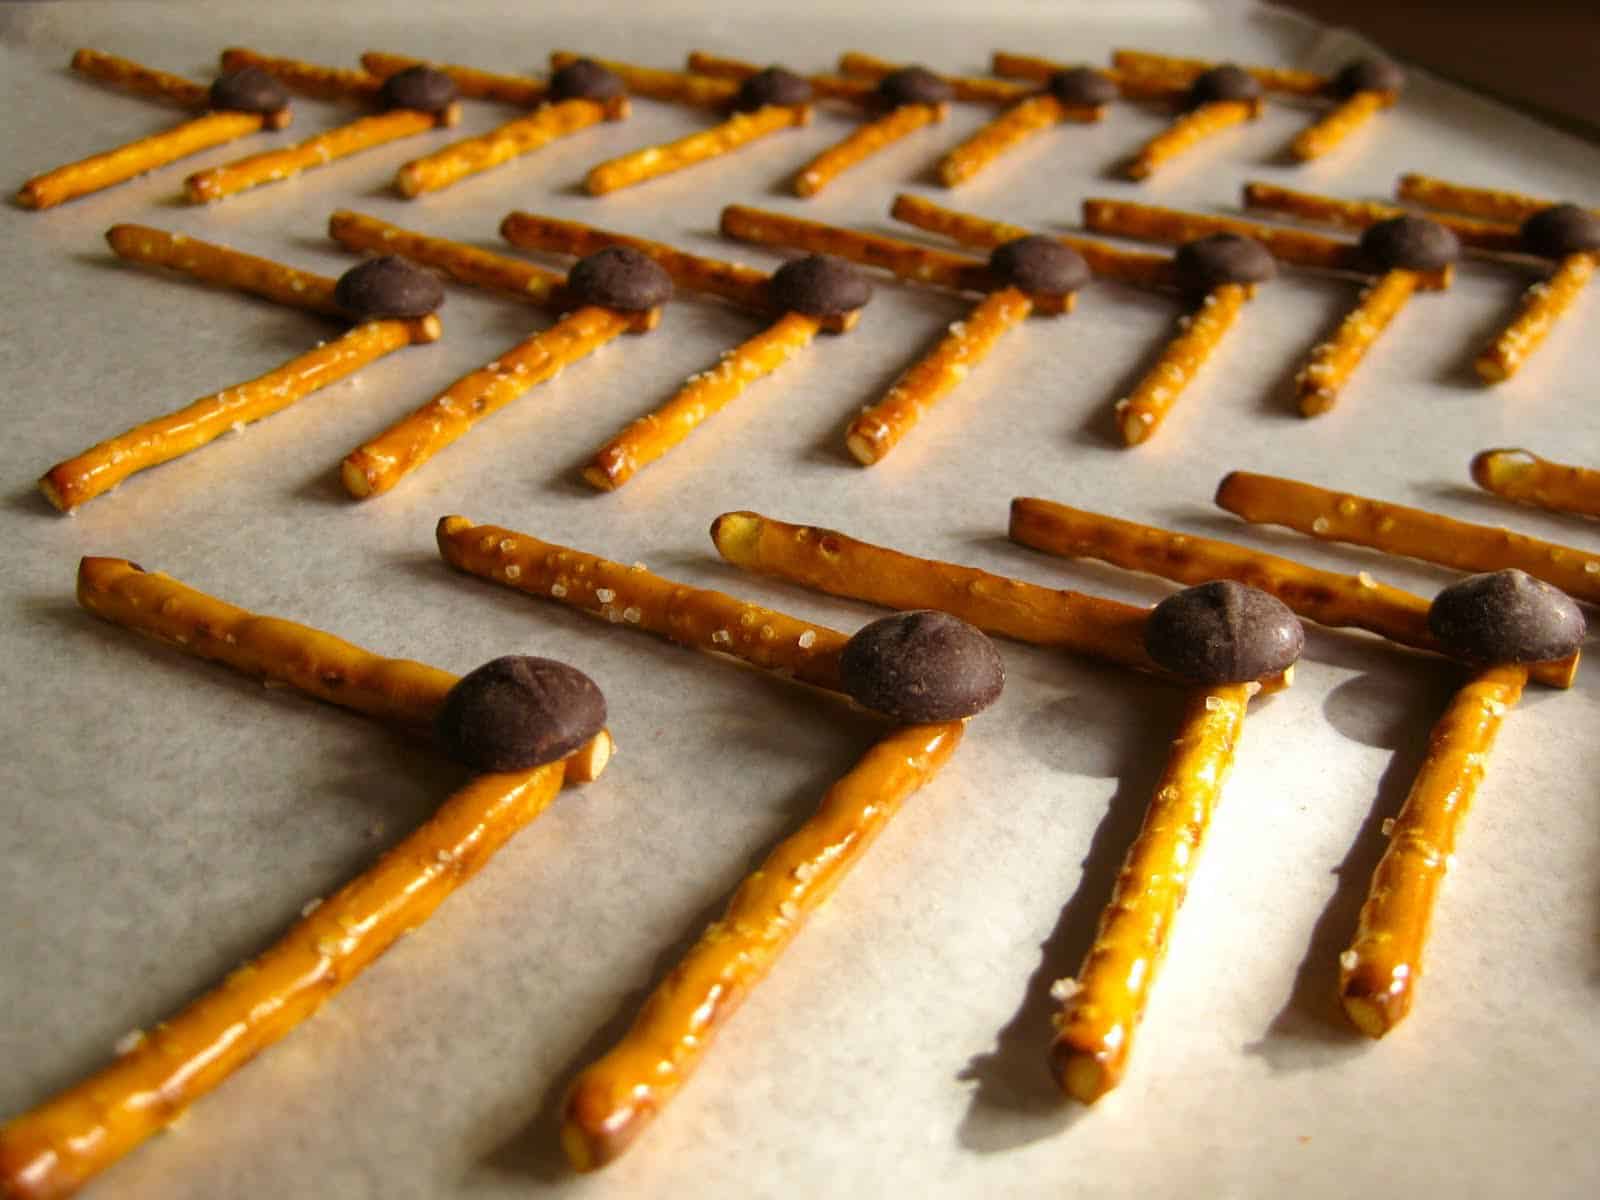 Stick pretzels with chocolate chips arranged on a baking sheet.